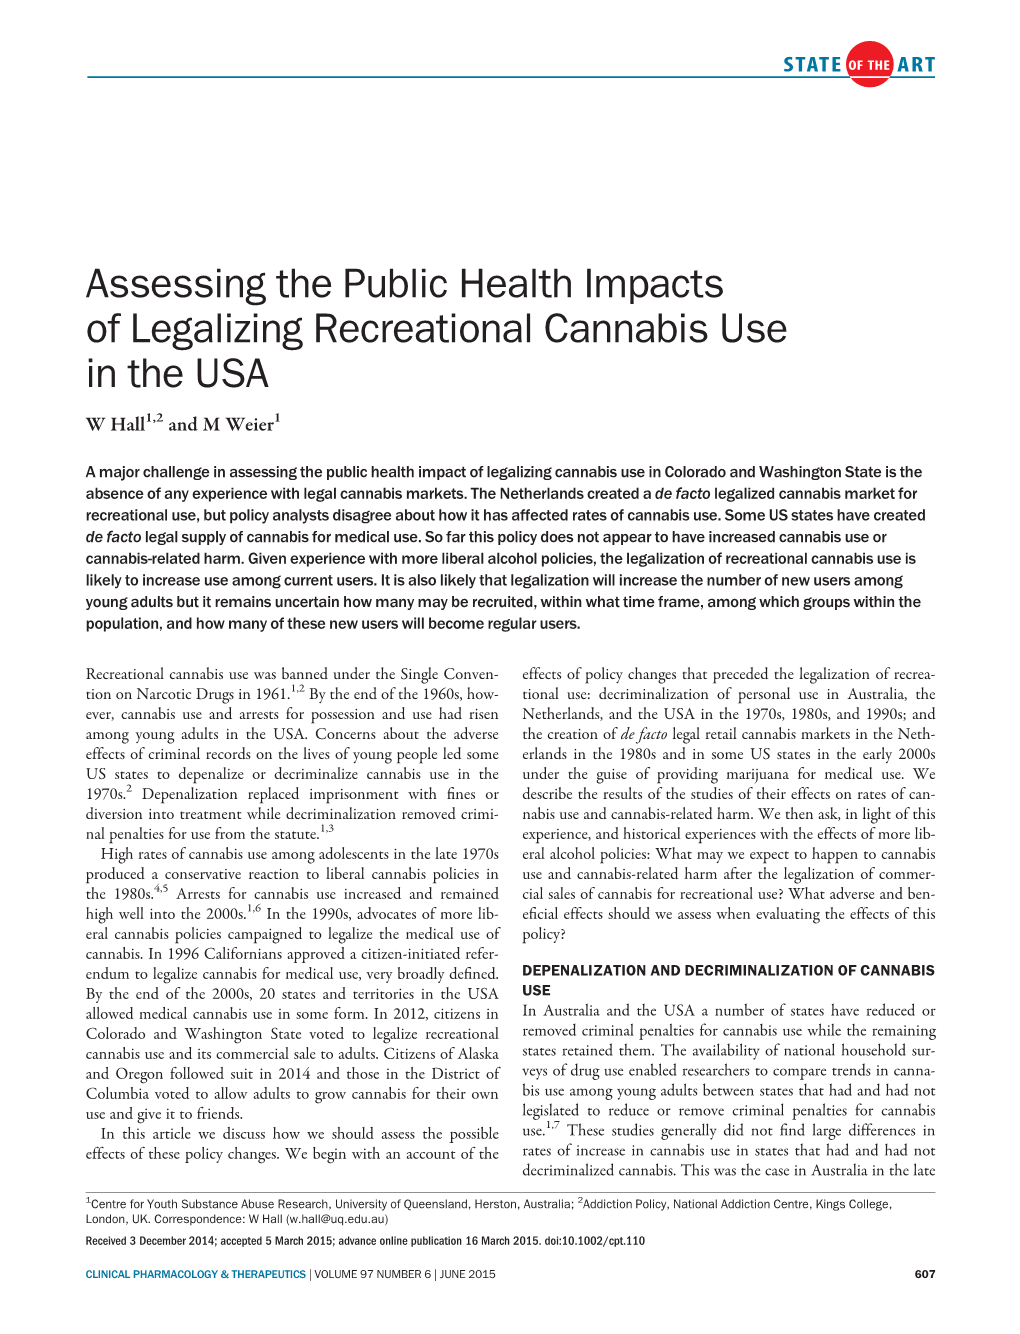 Assessing the Public Health Impacts of Legalizing Recreational Cannabis Use in the USA